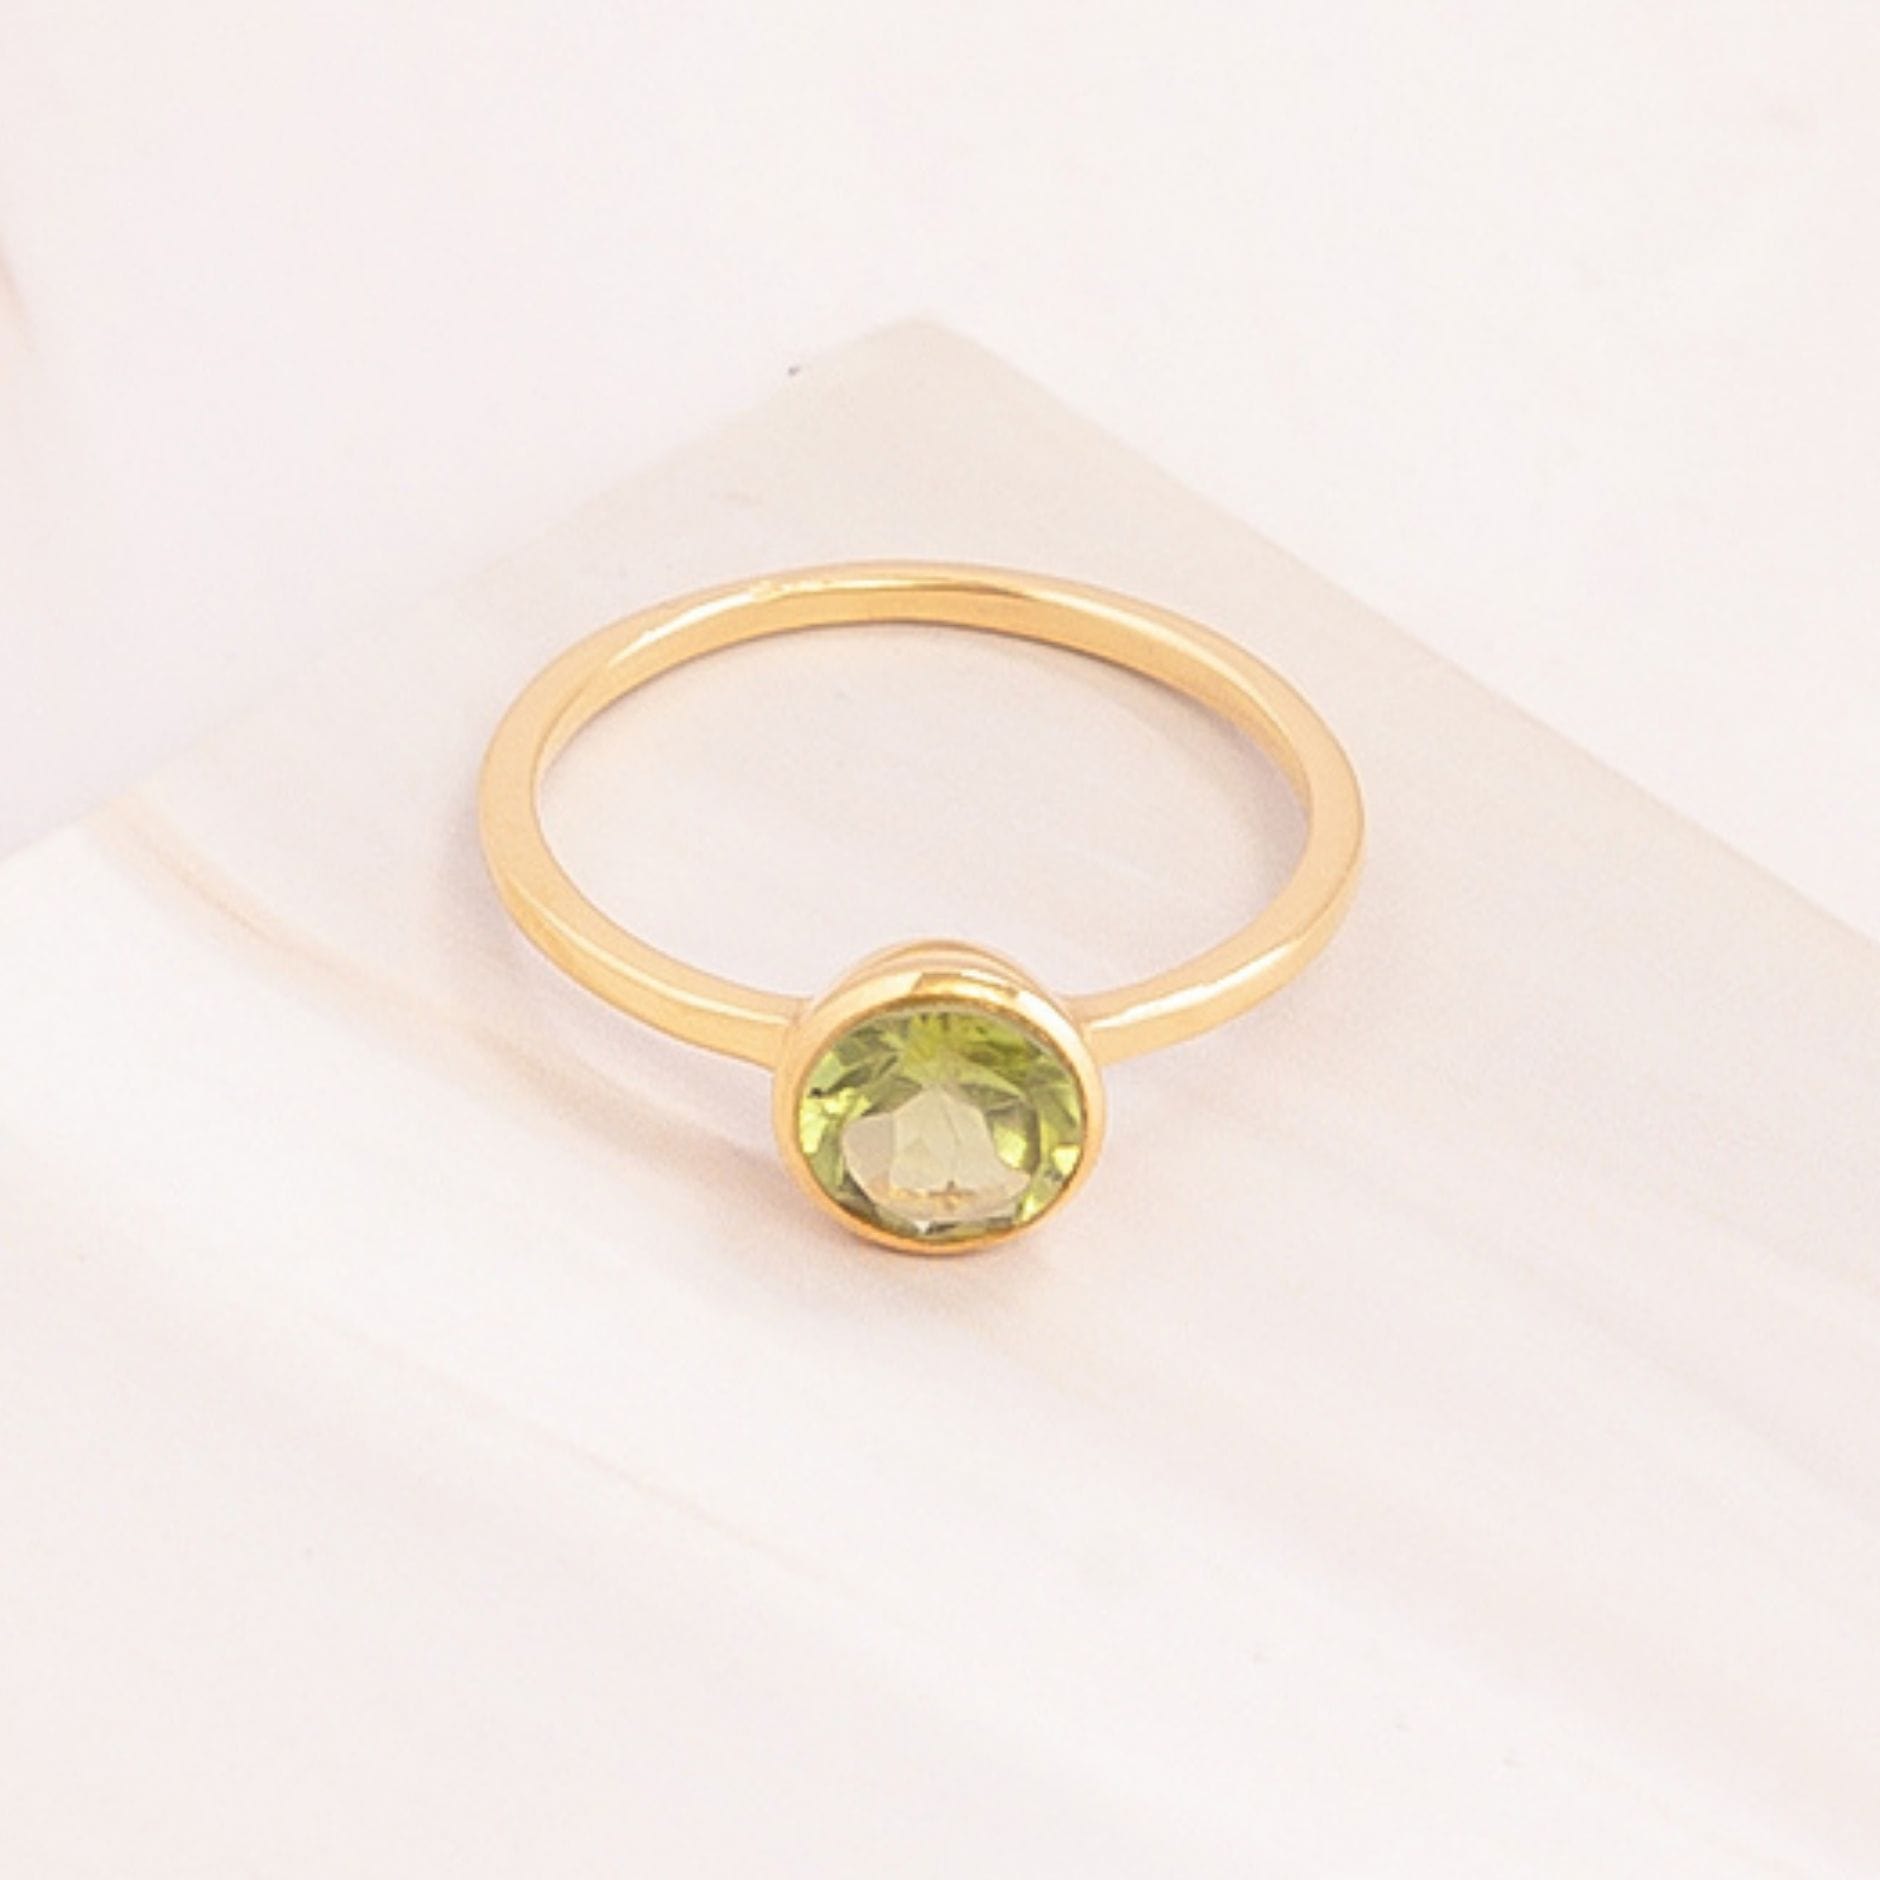 Emblem Jewelry Rings Green Peridot / Round Signature Candy Gemstone Stack Rings (Ring Size 5)